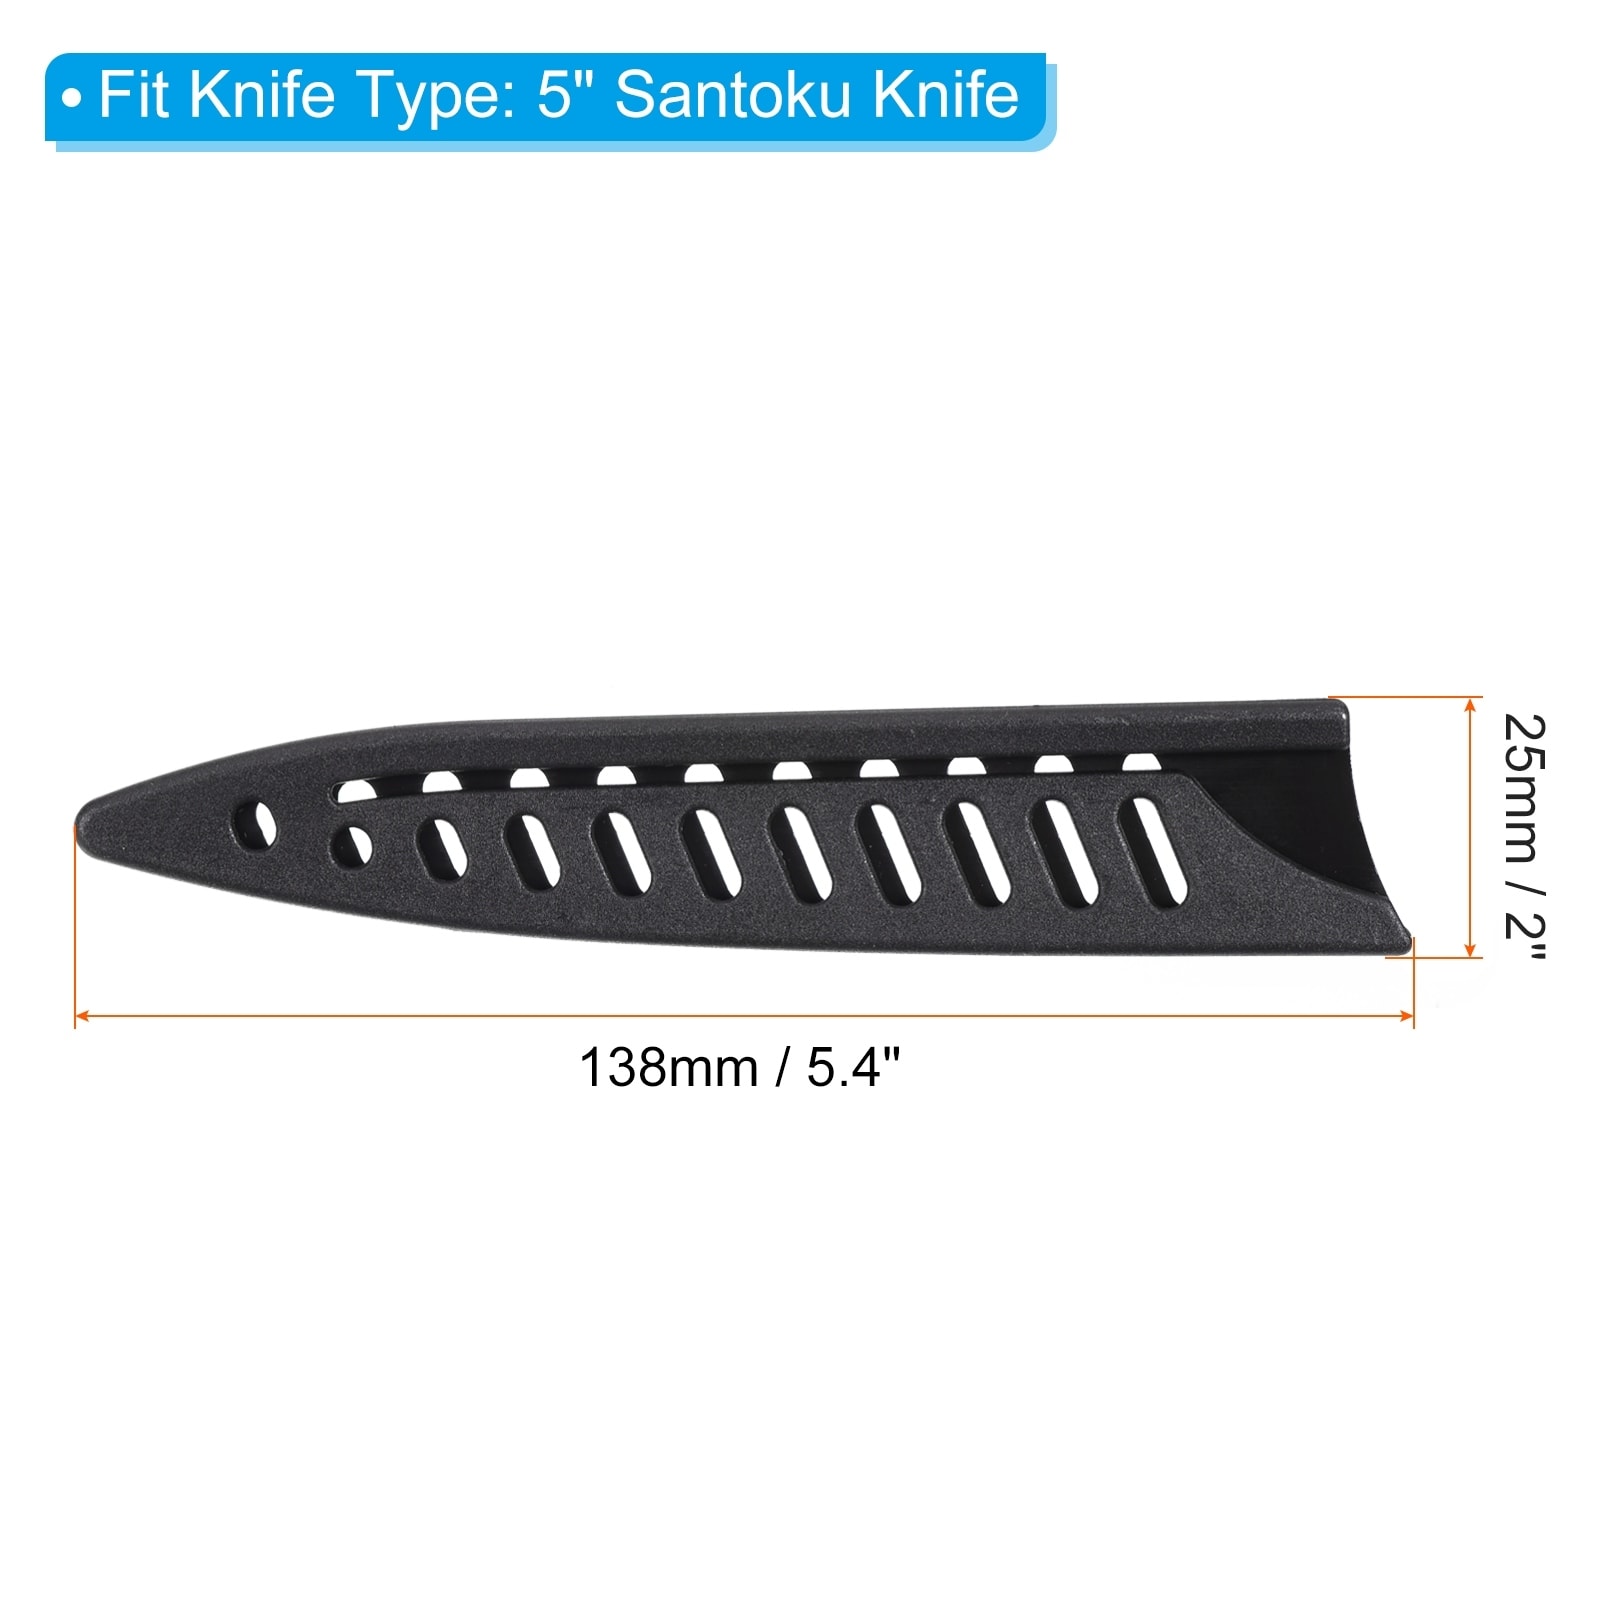 PP Kitchen Knife Sheath Cover Sleeves Portable for Paring knife - Black -  On Sale - Bed Bath & Beyond - 37922221